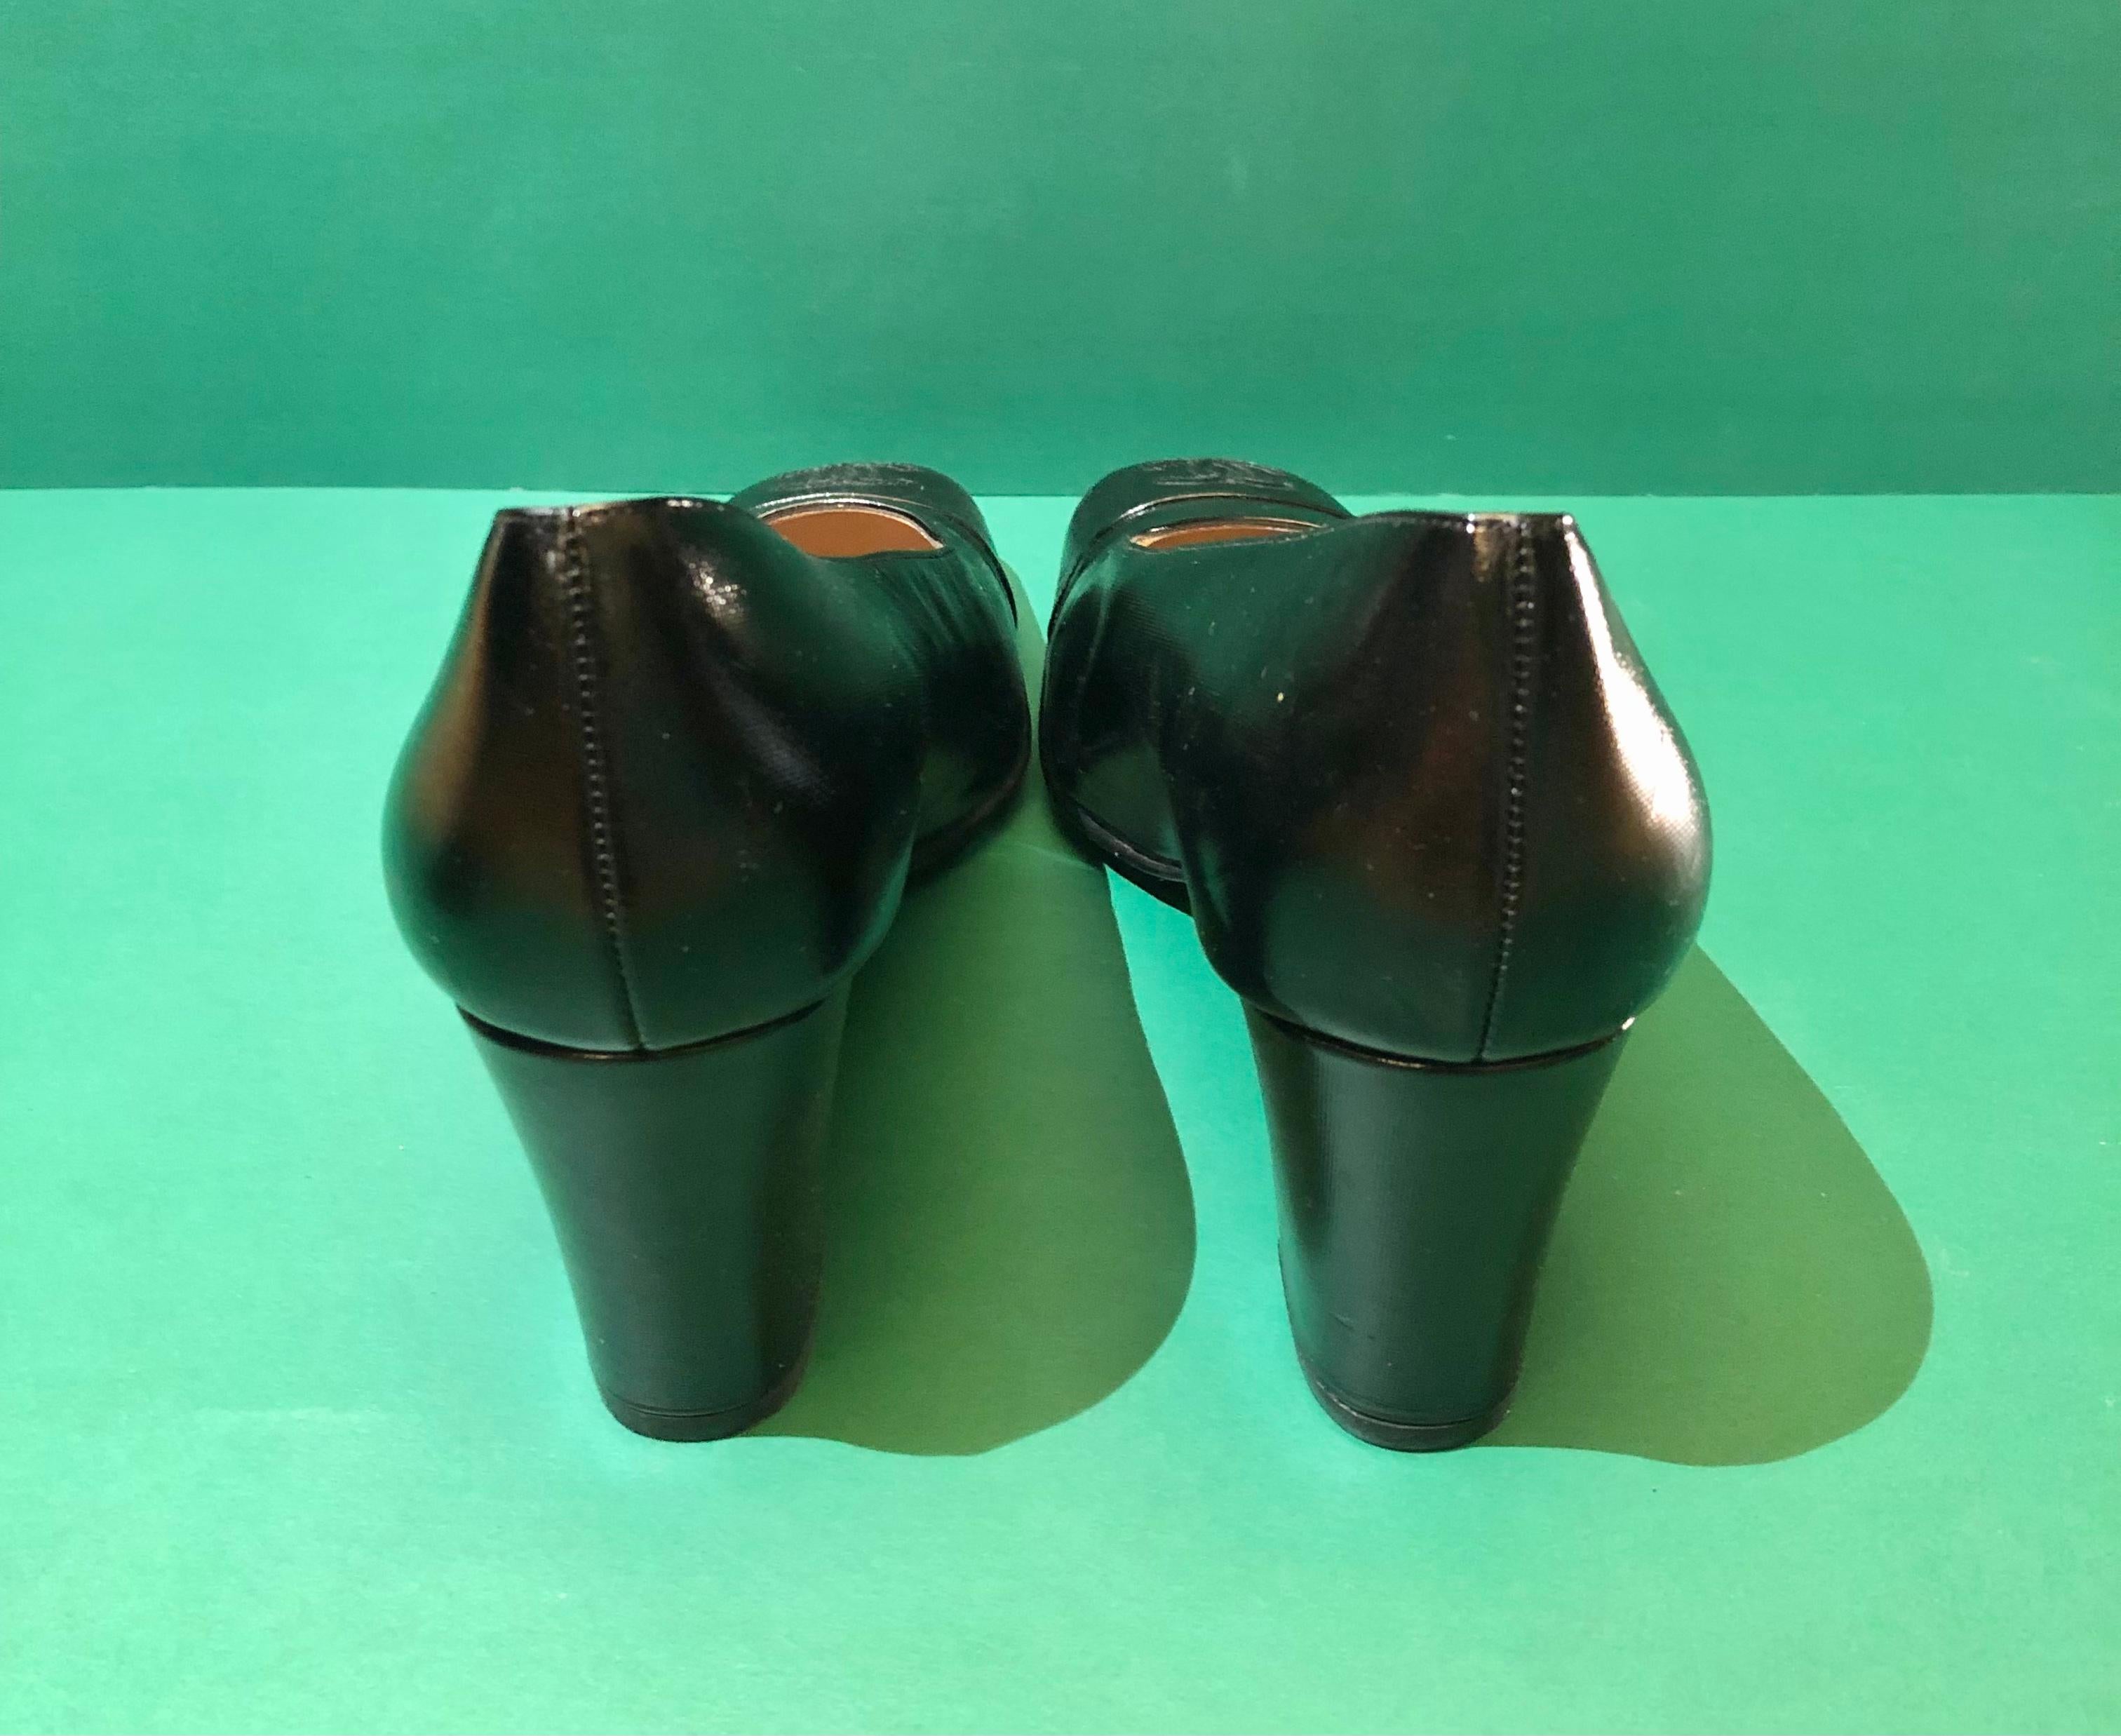 patent leather mary jane heels